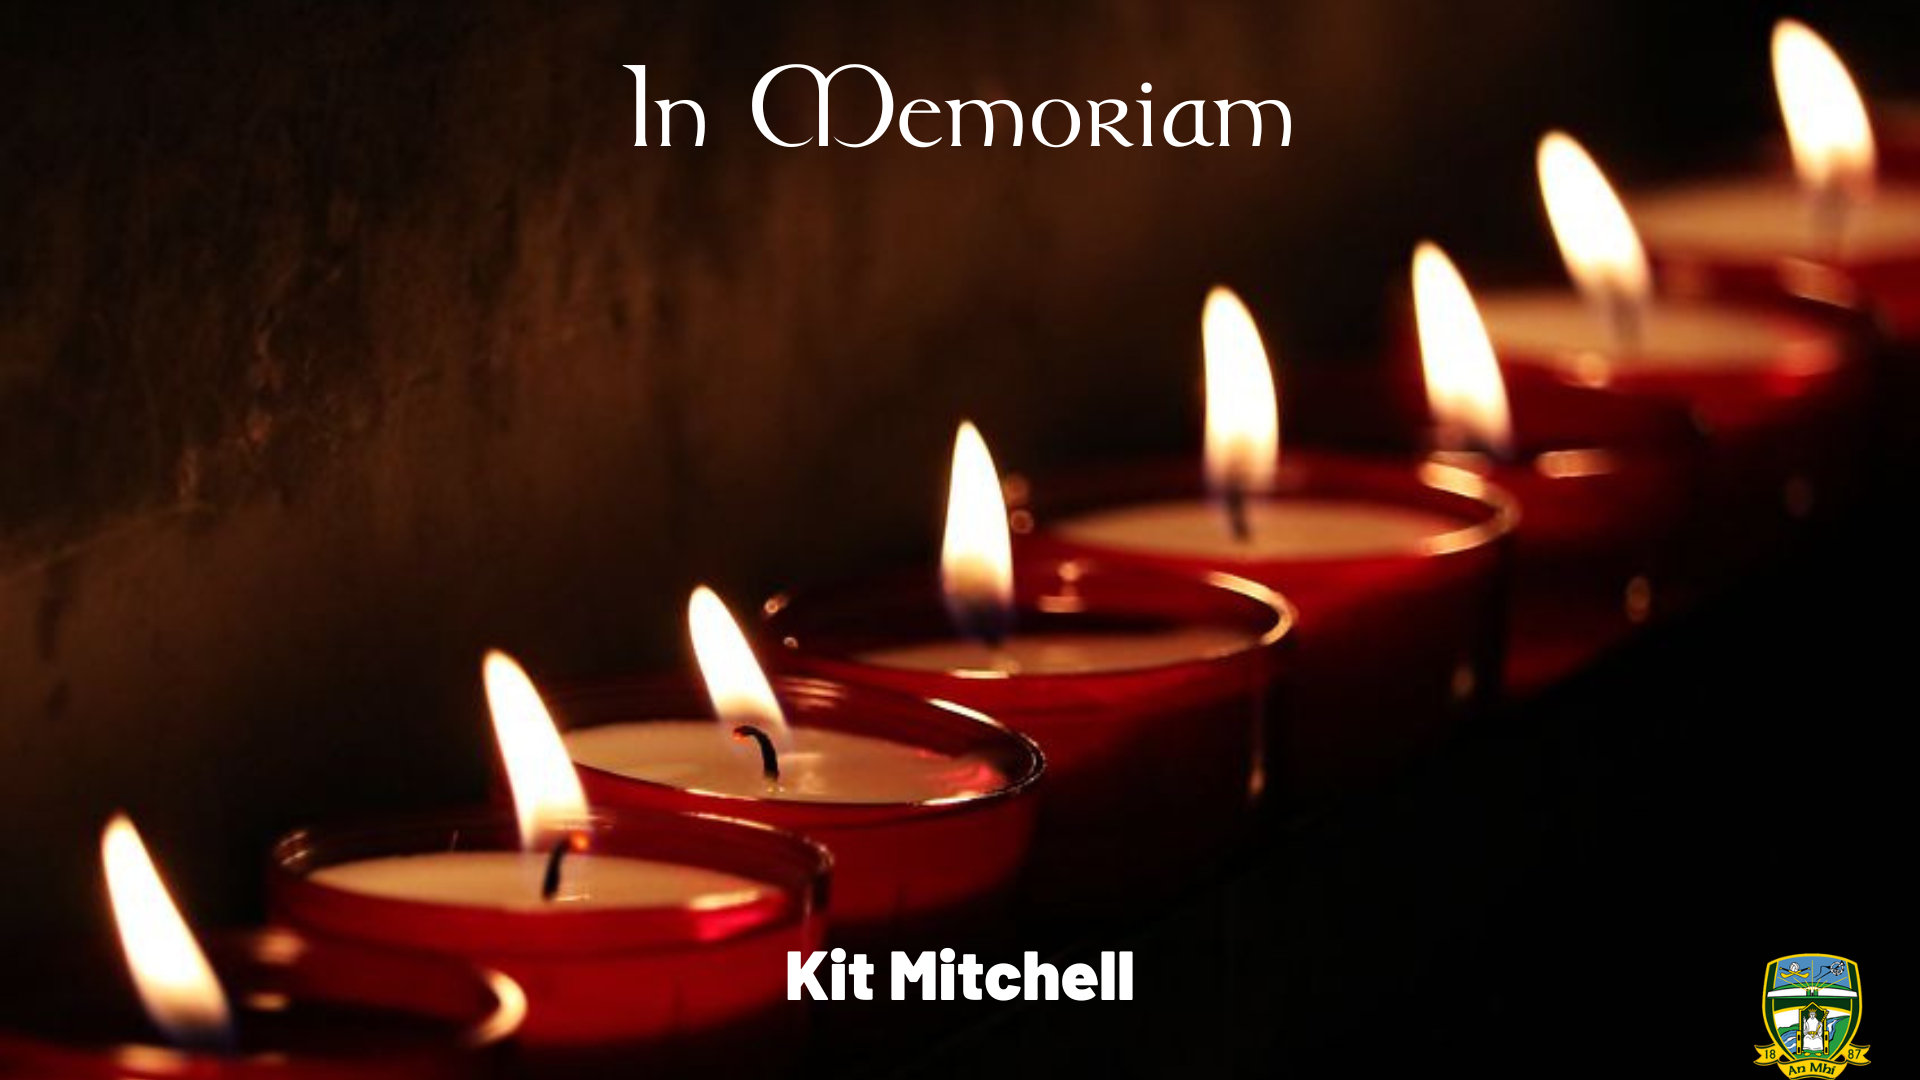 Kit Mitchell – A Tribute from Killyon